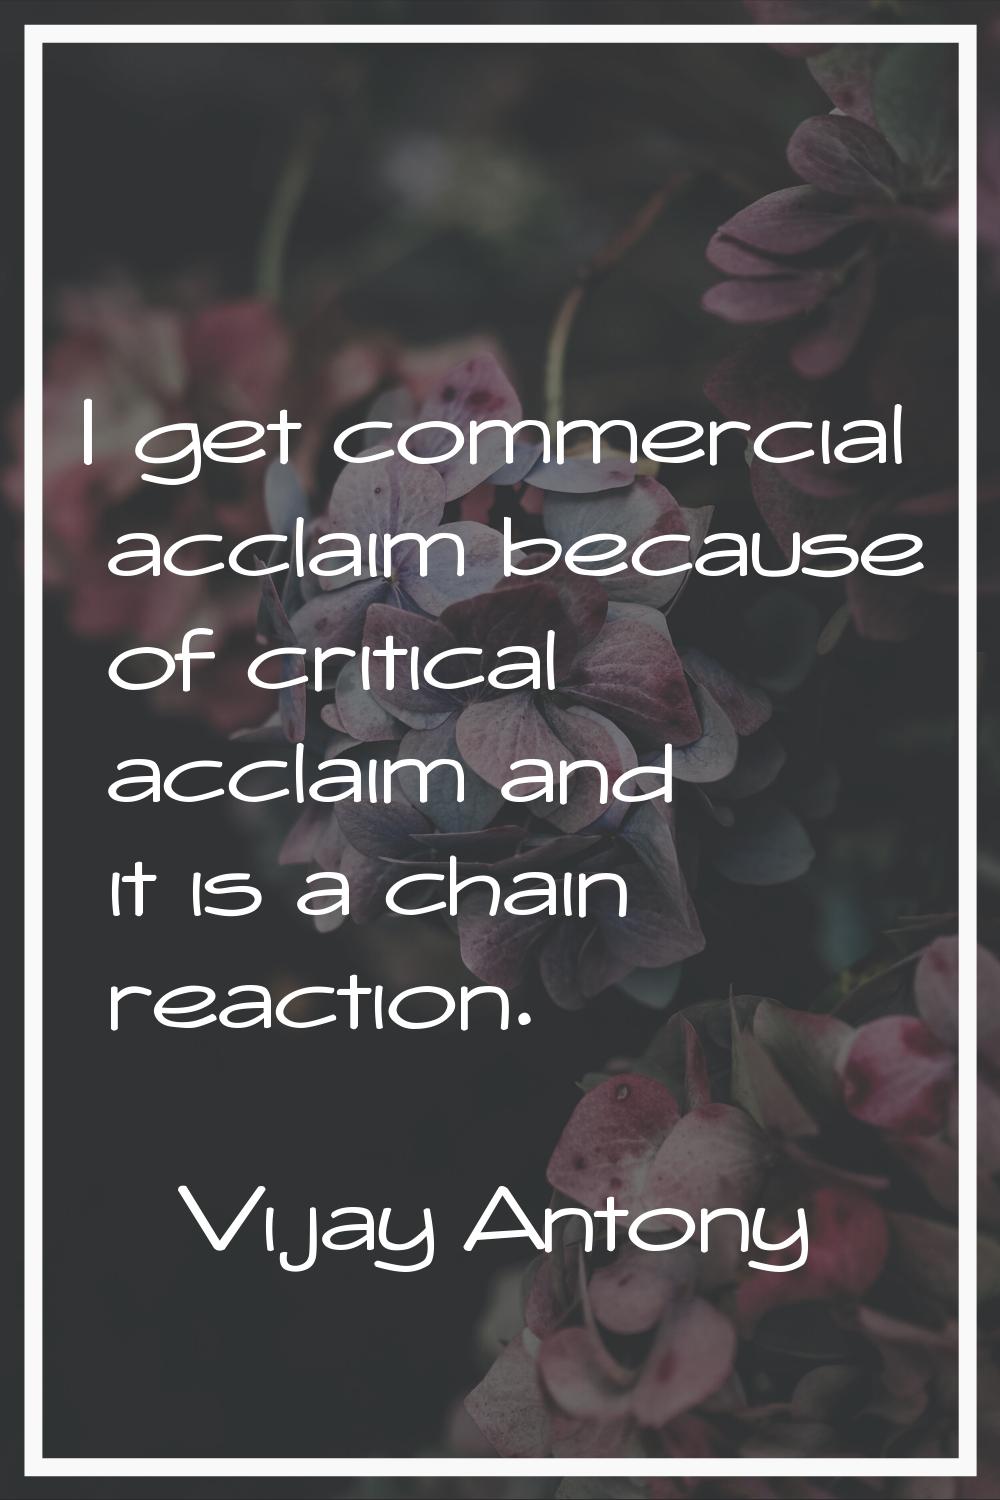 I get commercial acclaim because of critical acclaim and it is a chain reaction.